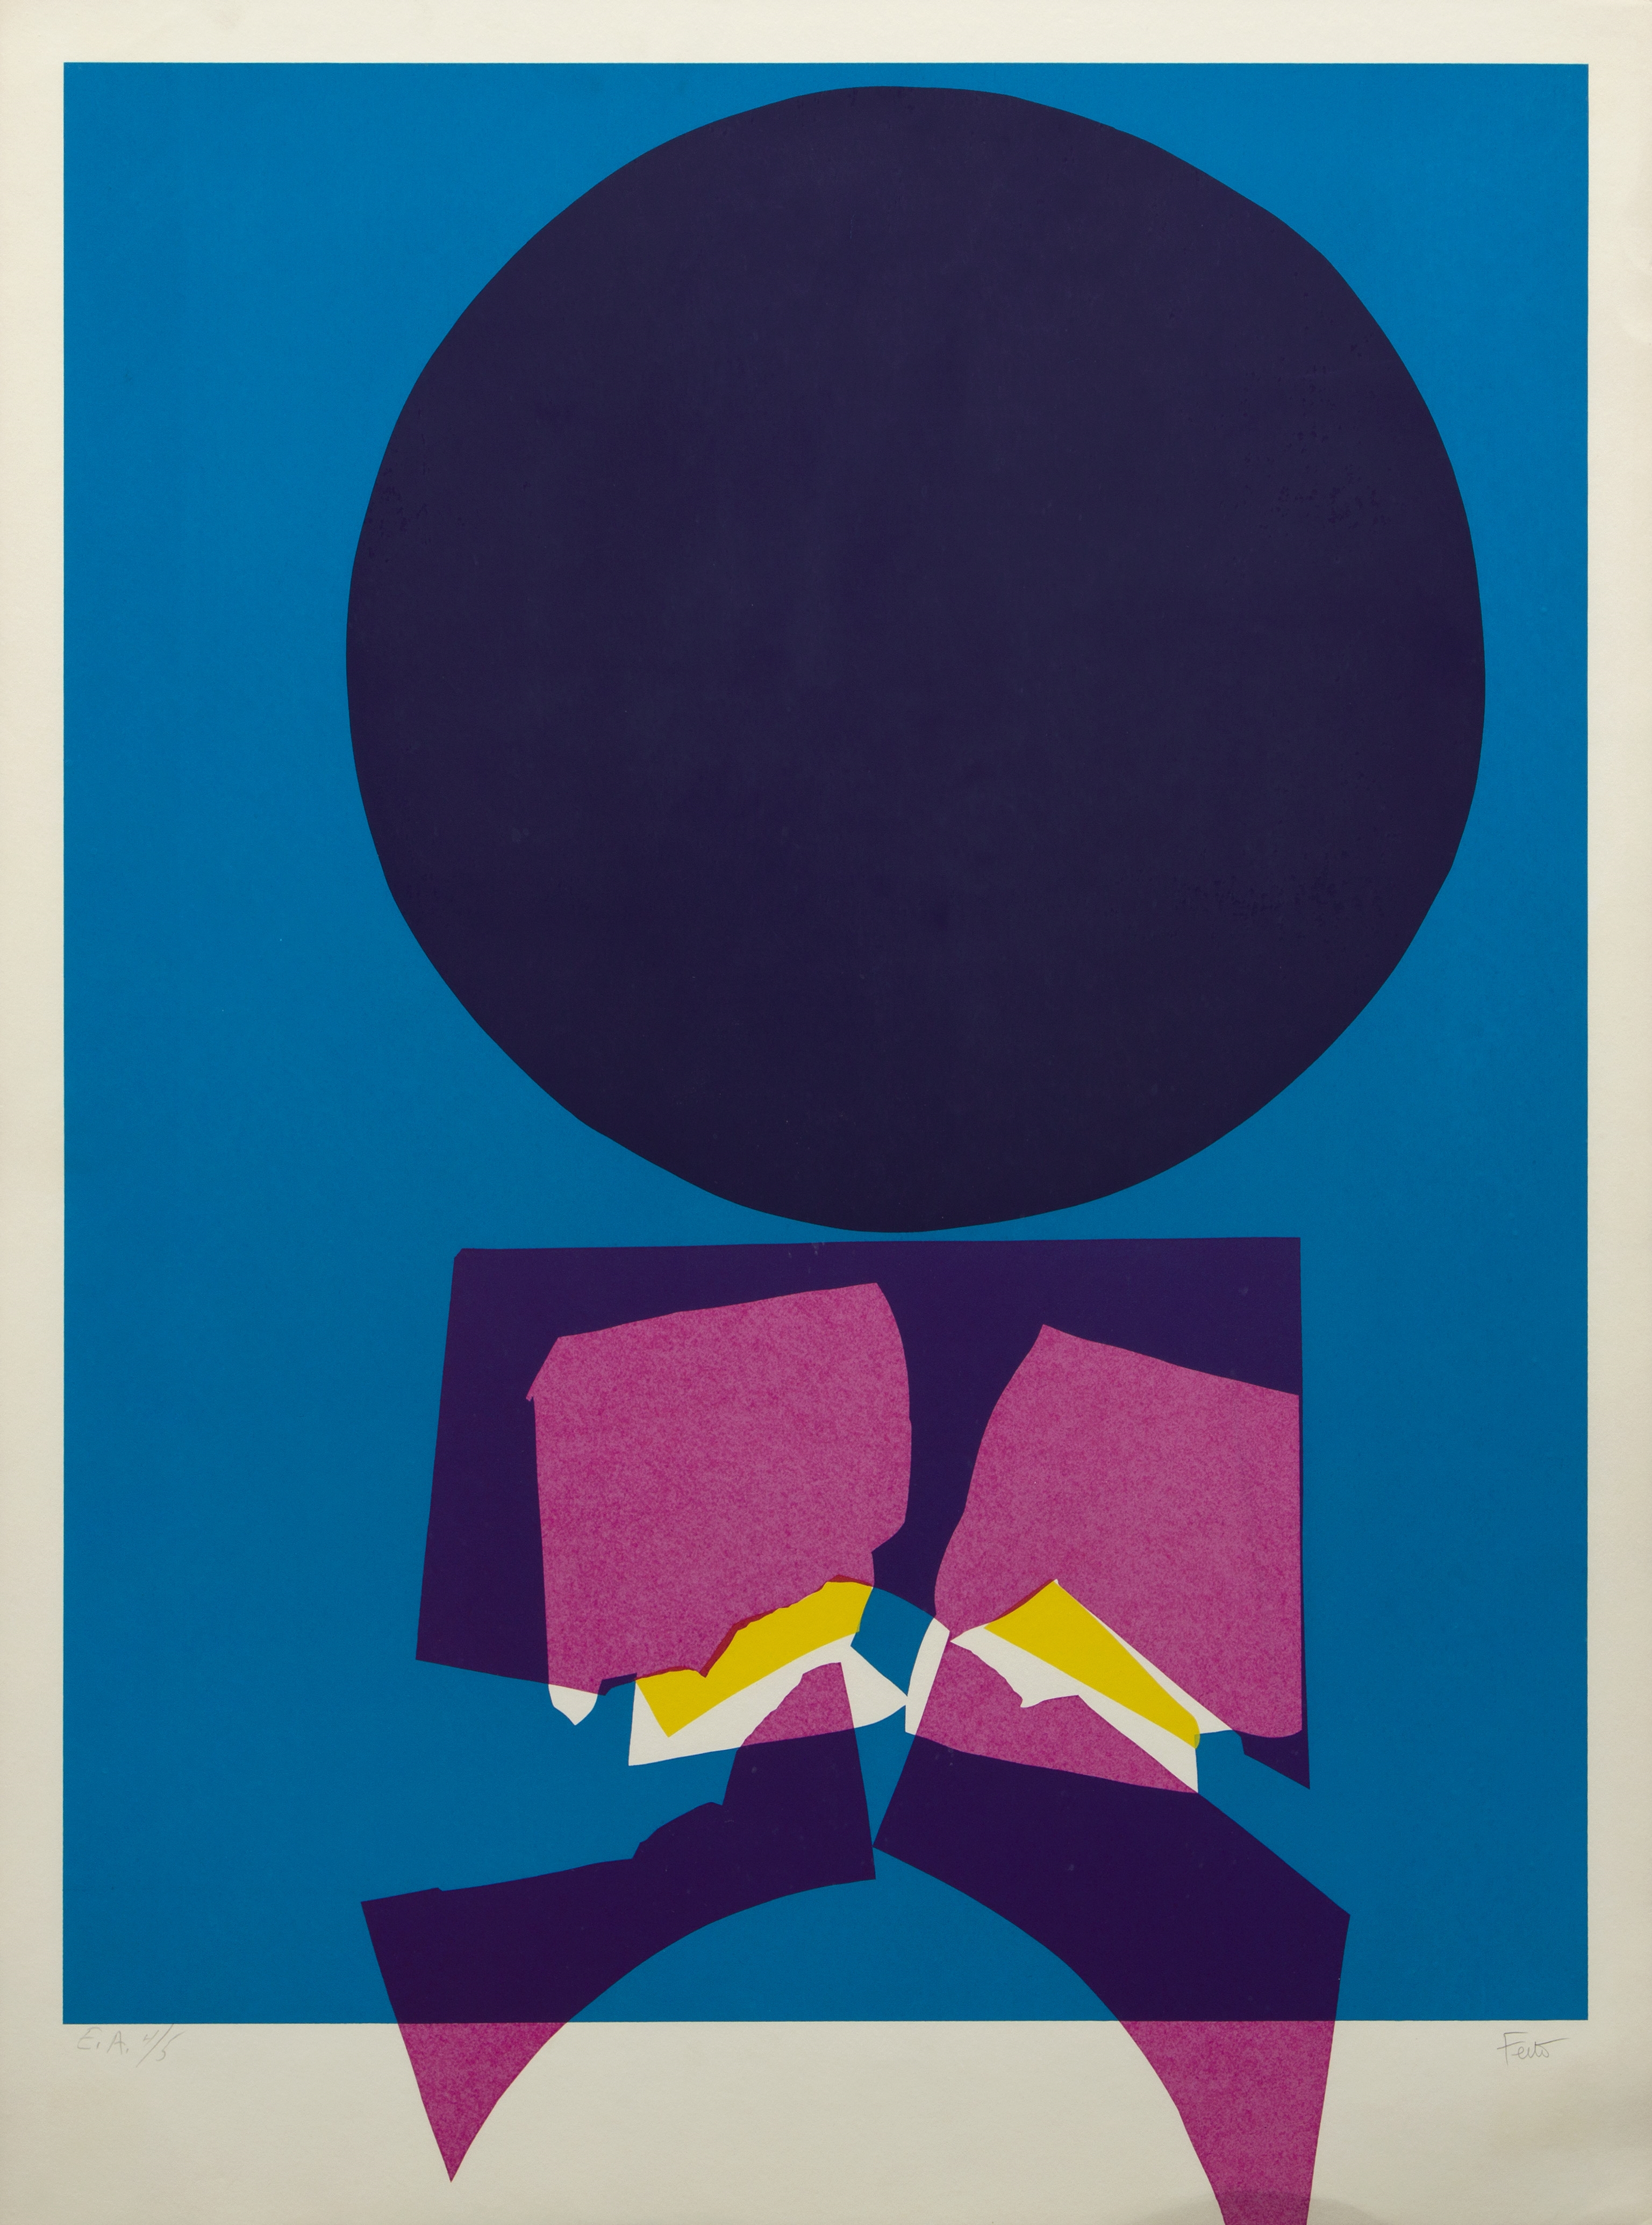 Artwork by Luis Feito, Sans titre / Untitled, Made of Color silkscreen